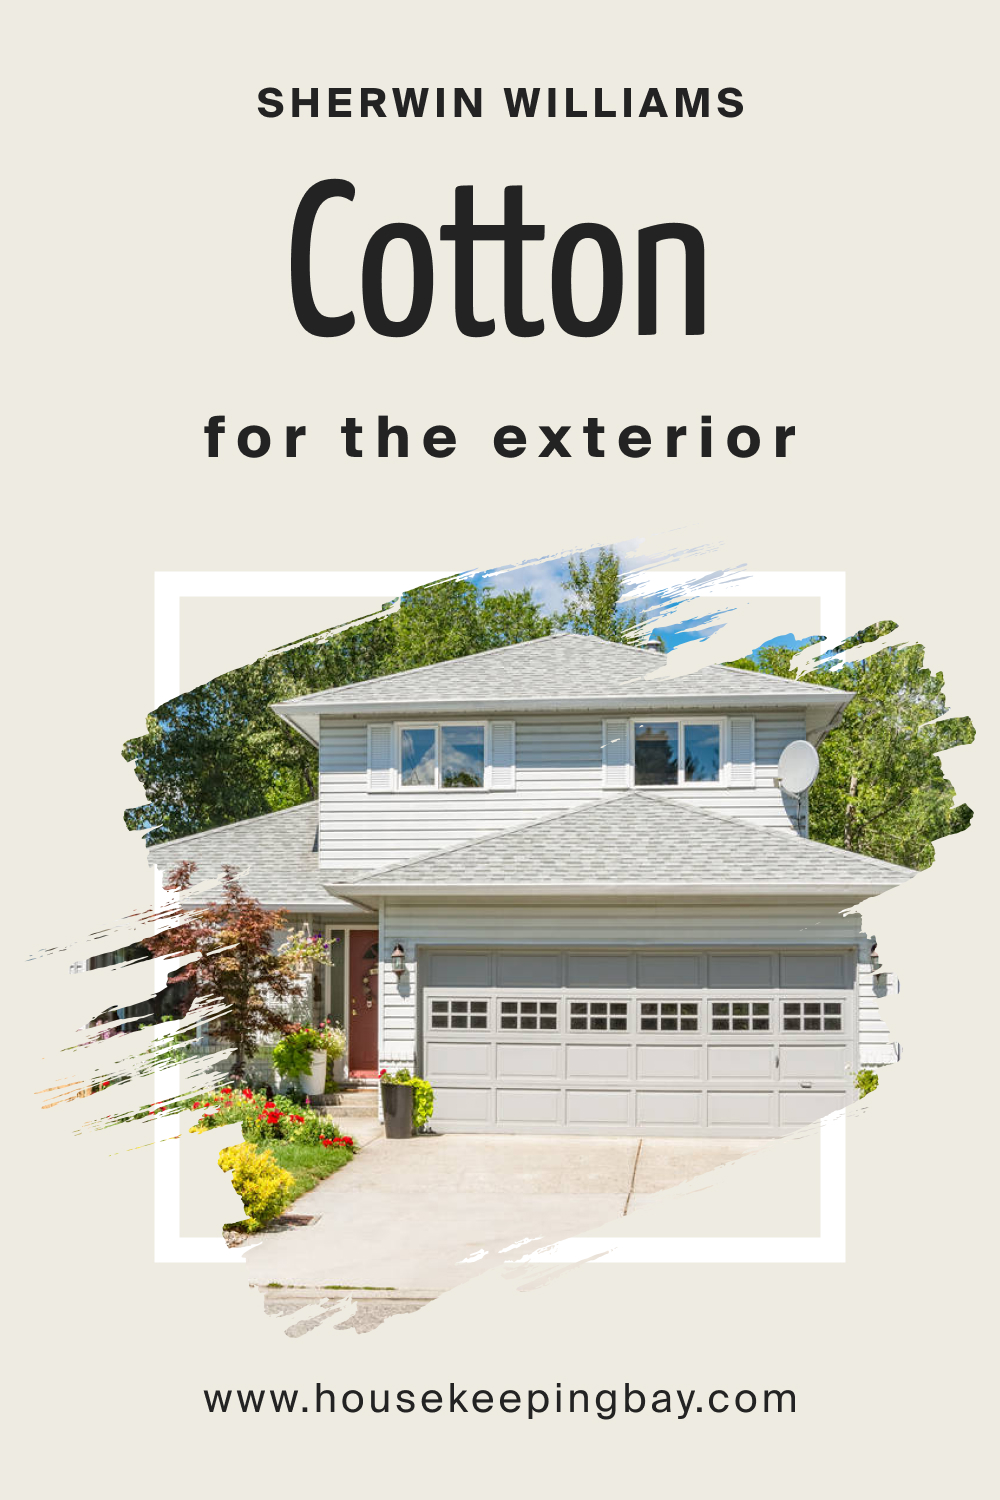 Sherwin Williams. SW 9581 Cotton For the exterior